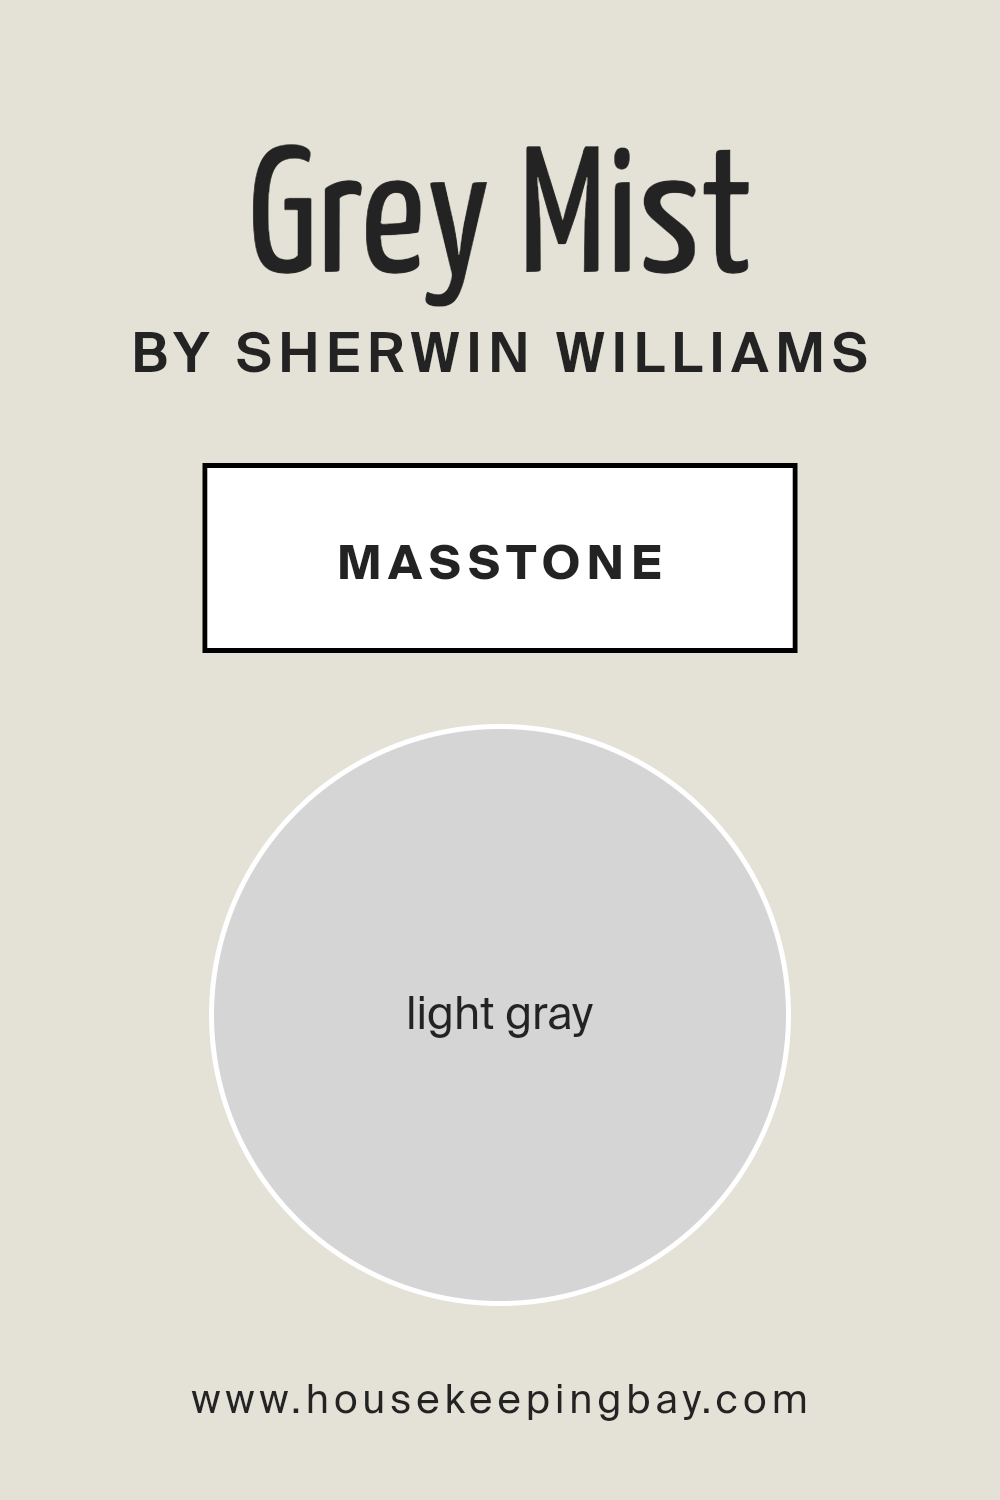 what_is_the_masstone_of_grey_mist_sw_9625